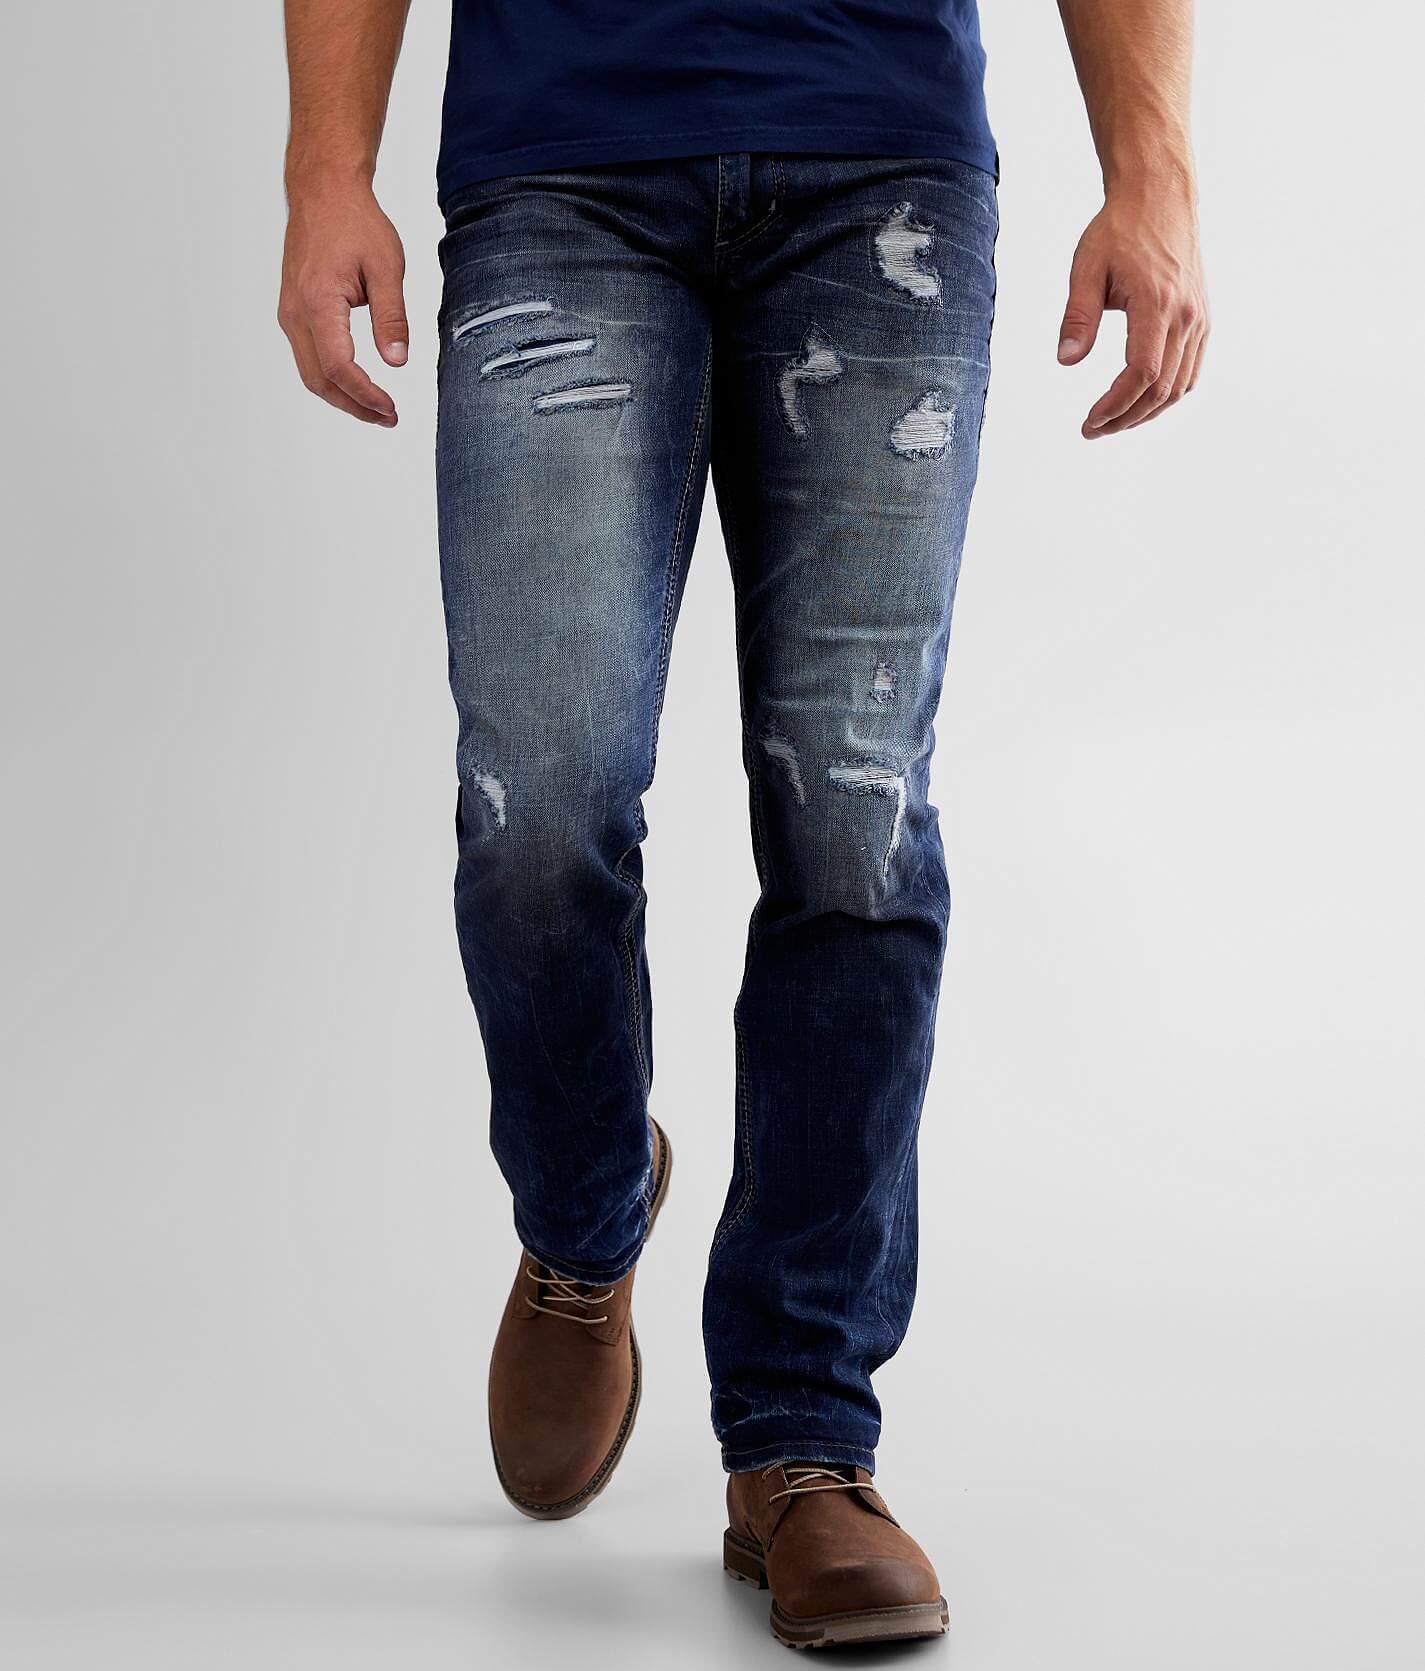 affliction jeans price